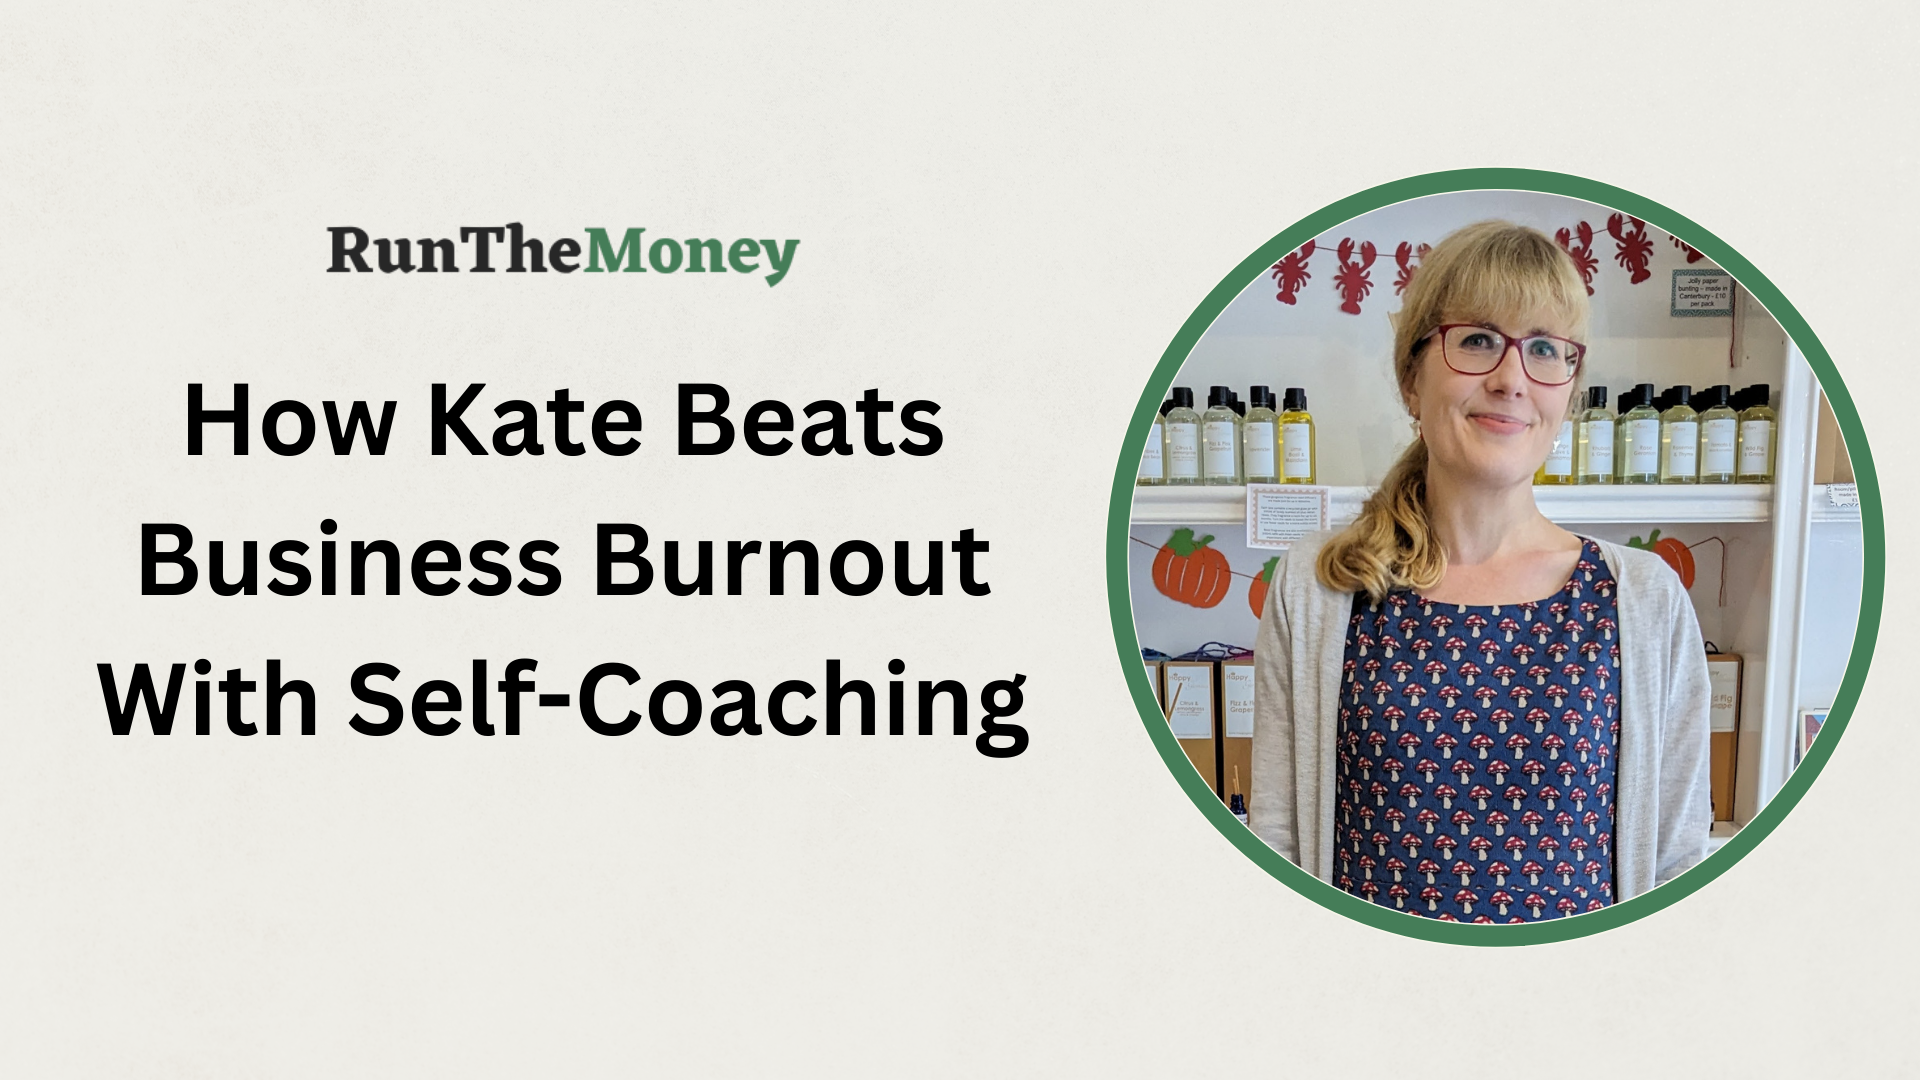 How Kate Beats Business Burnout With Self-Coaching